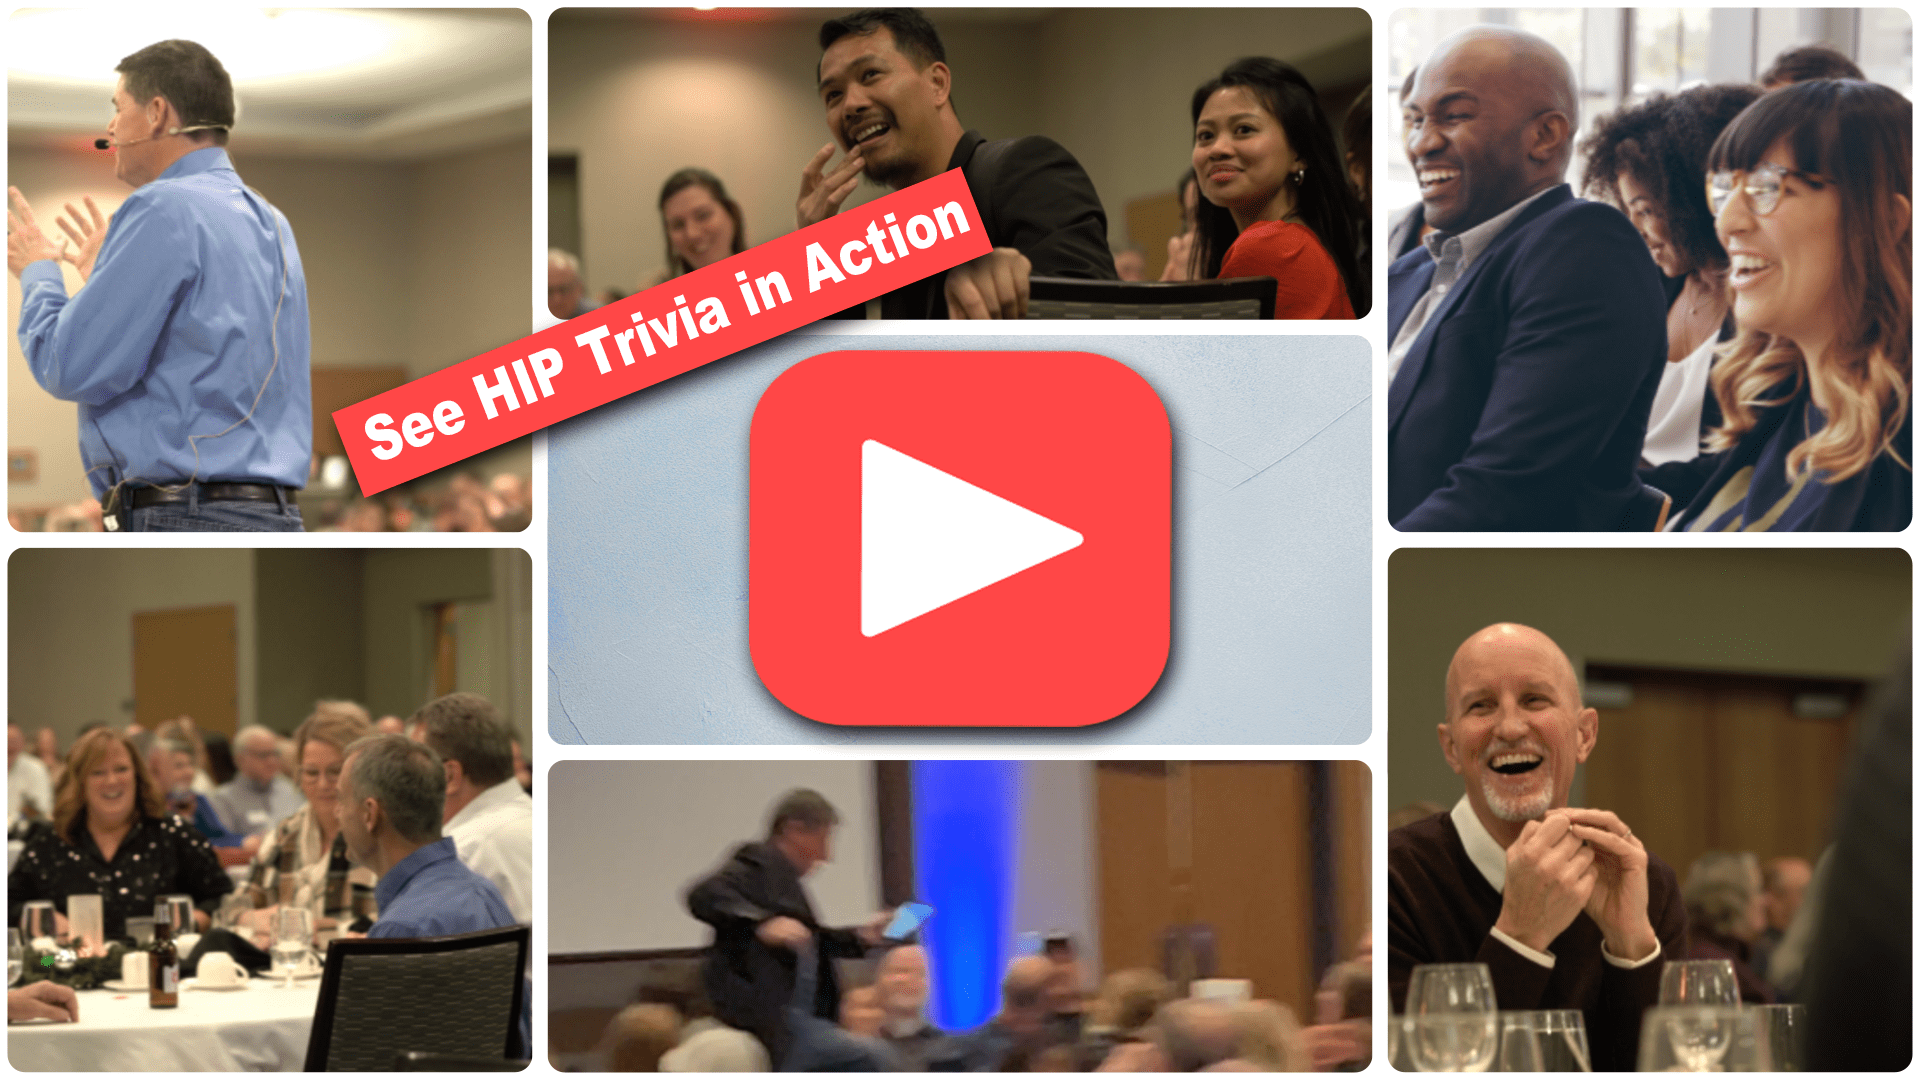 Click here to see a video of HIP Trivia in action.